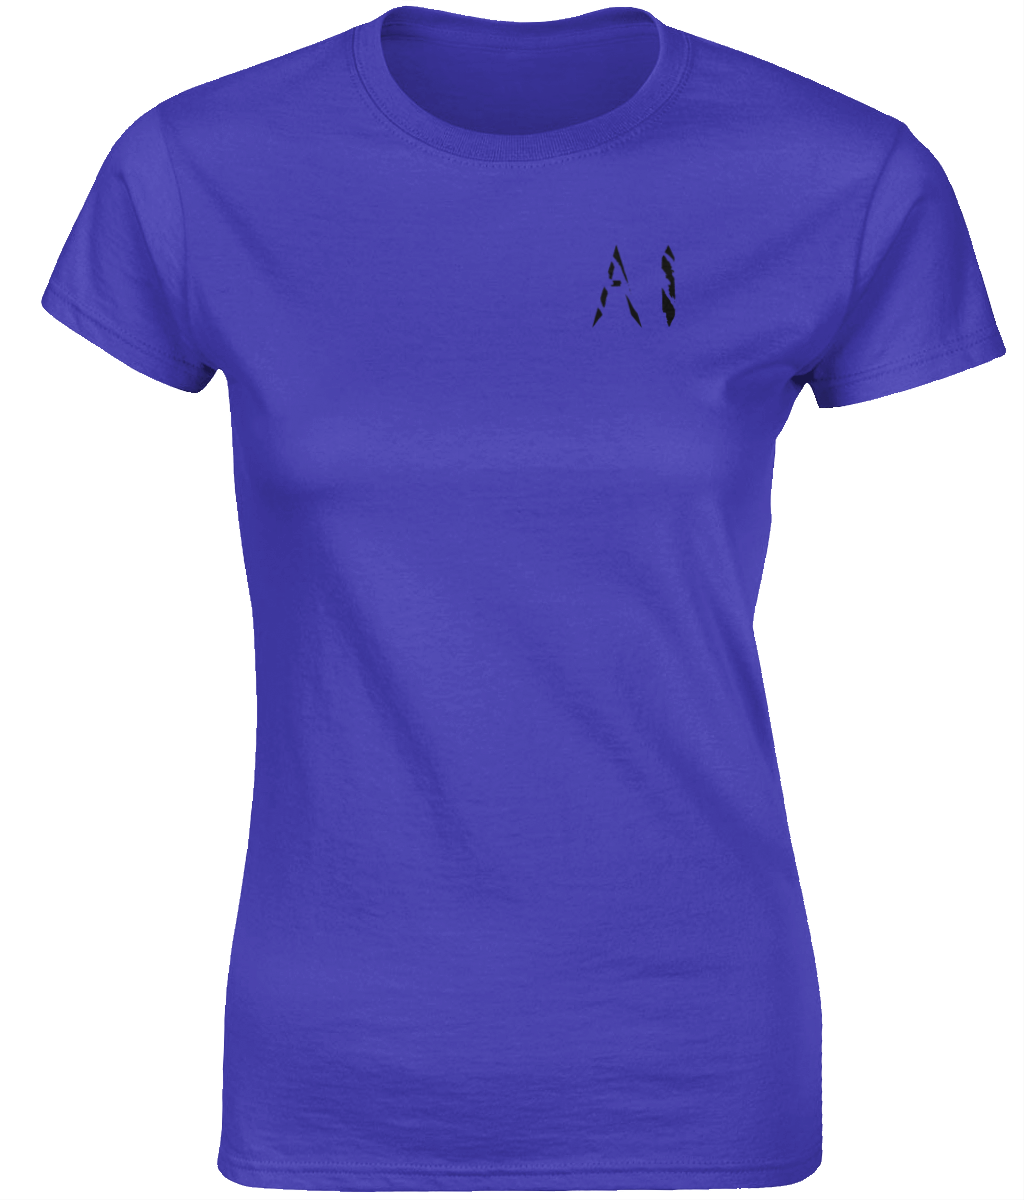 Womens purple Fitted Ringspun T-Shirt with black AI logo on left breast